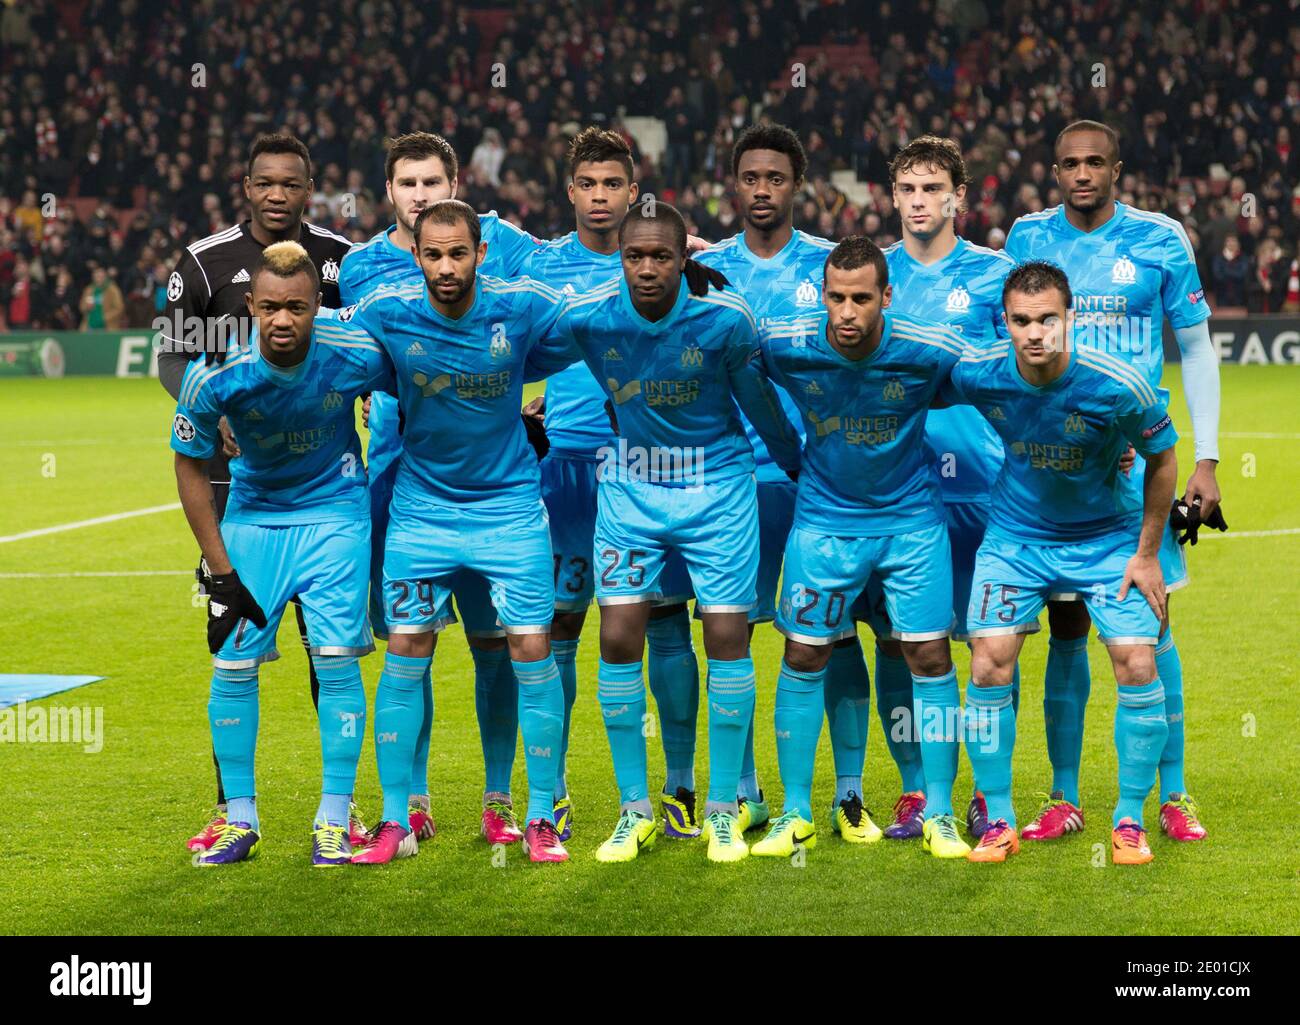 Olympique de Marseille team group during the UEFA champions League Group F  soccer match, Arsenal Vs Olympique de Marseille at Emirates Stadium in  London, England on November 26th, 2013. Photo by Guillaume